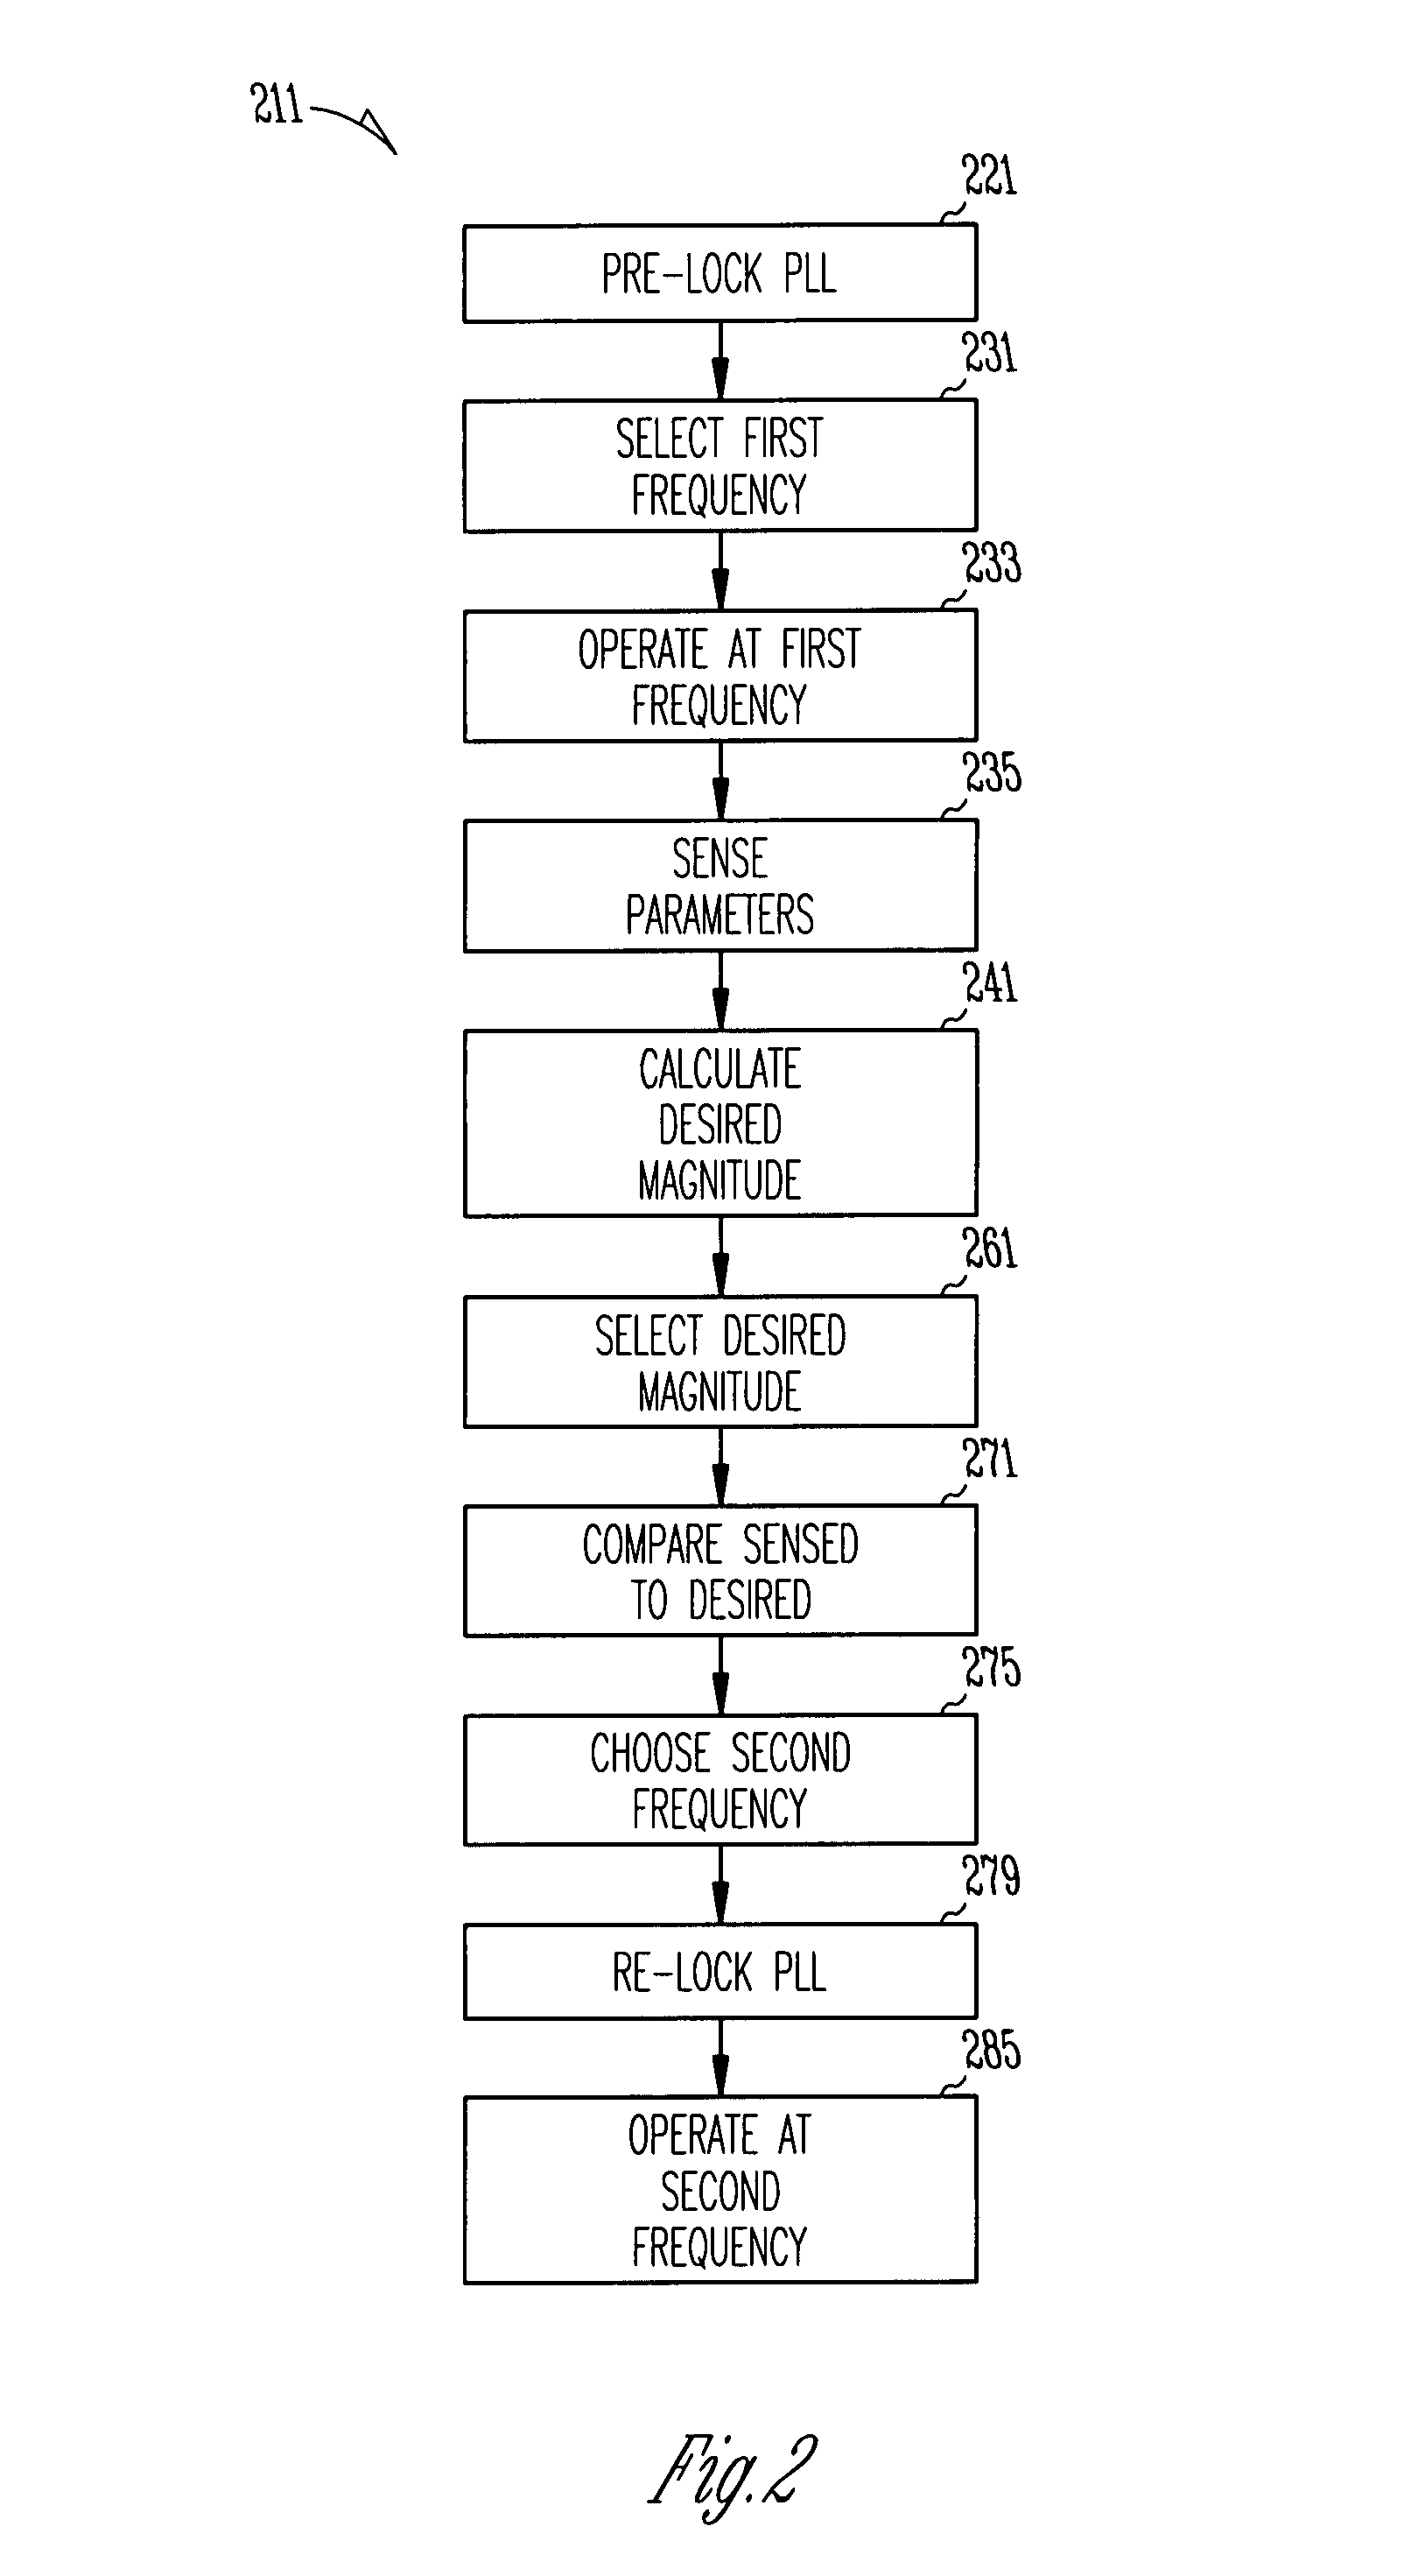 Frequency management apparatus, systems, and methods